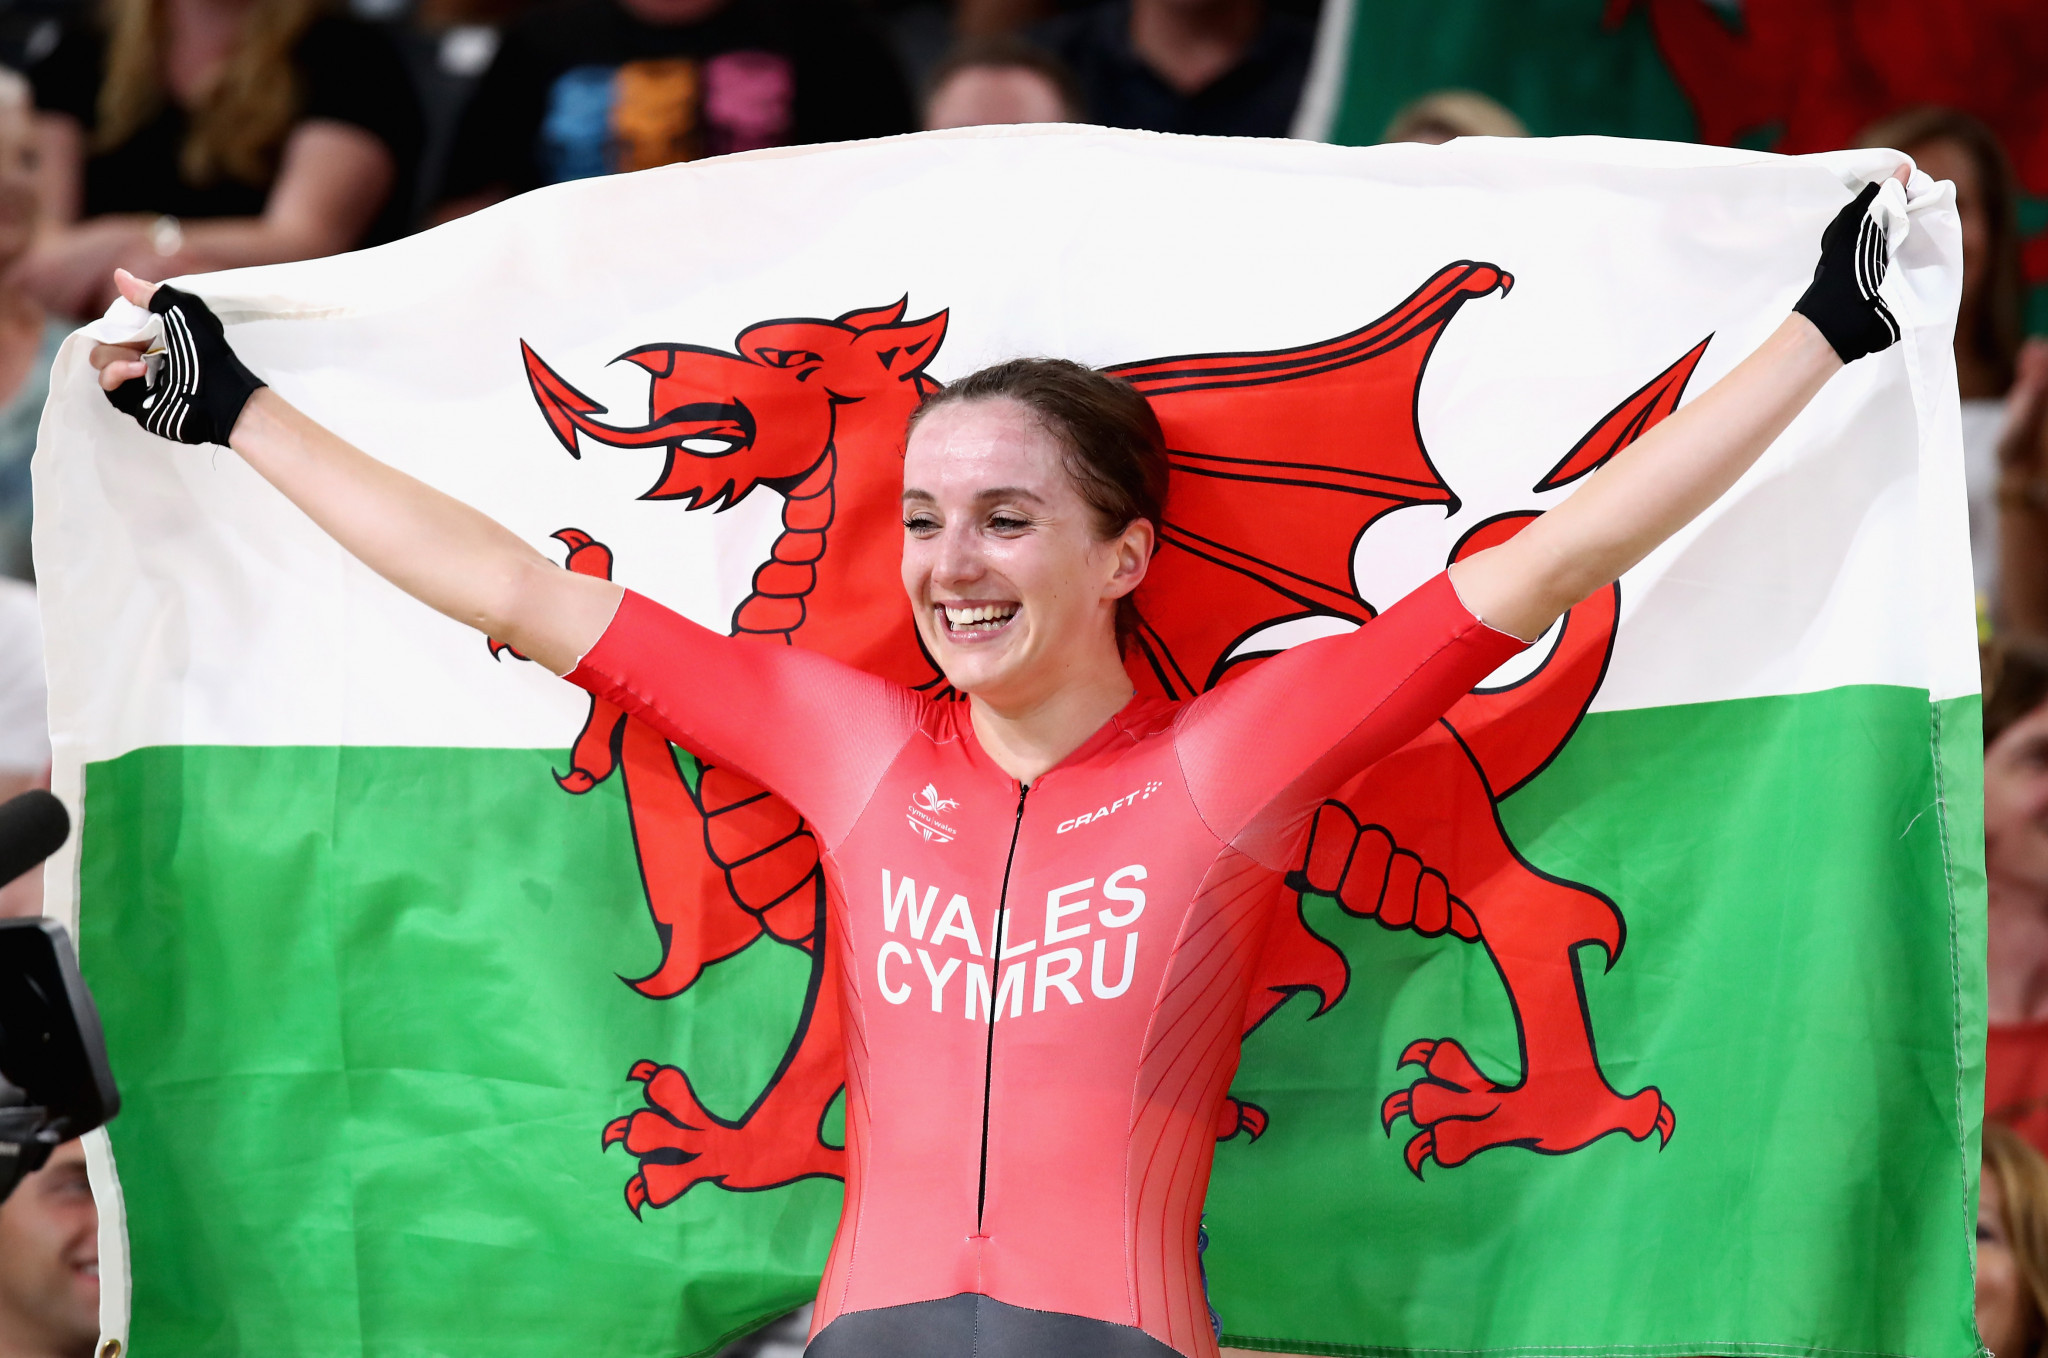 Elinor Barker is set to compete at Birmingham 2022 five months after giving birth to her first child ©Getty Images